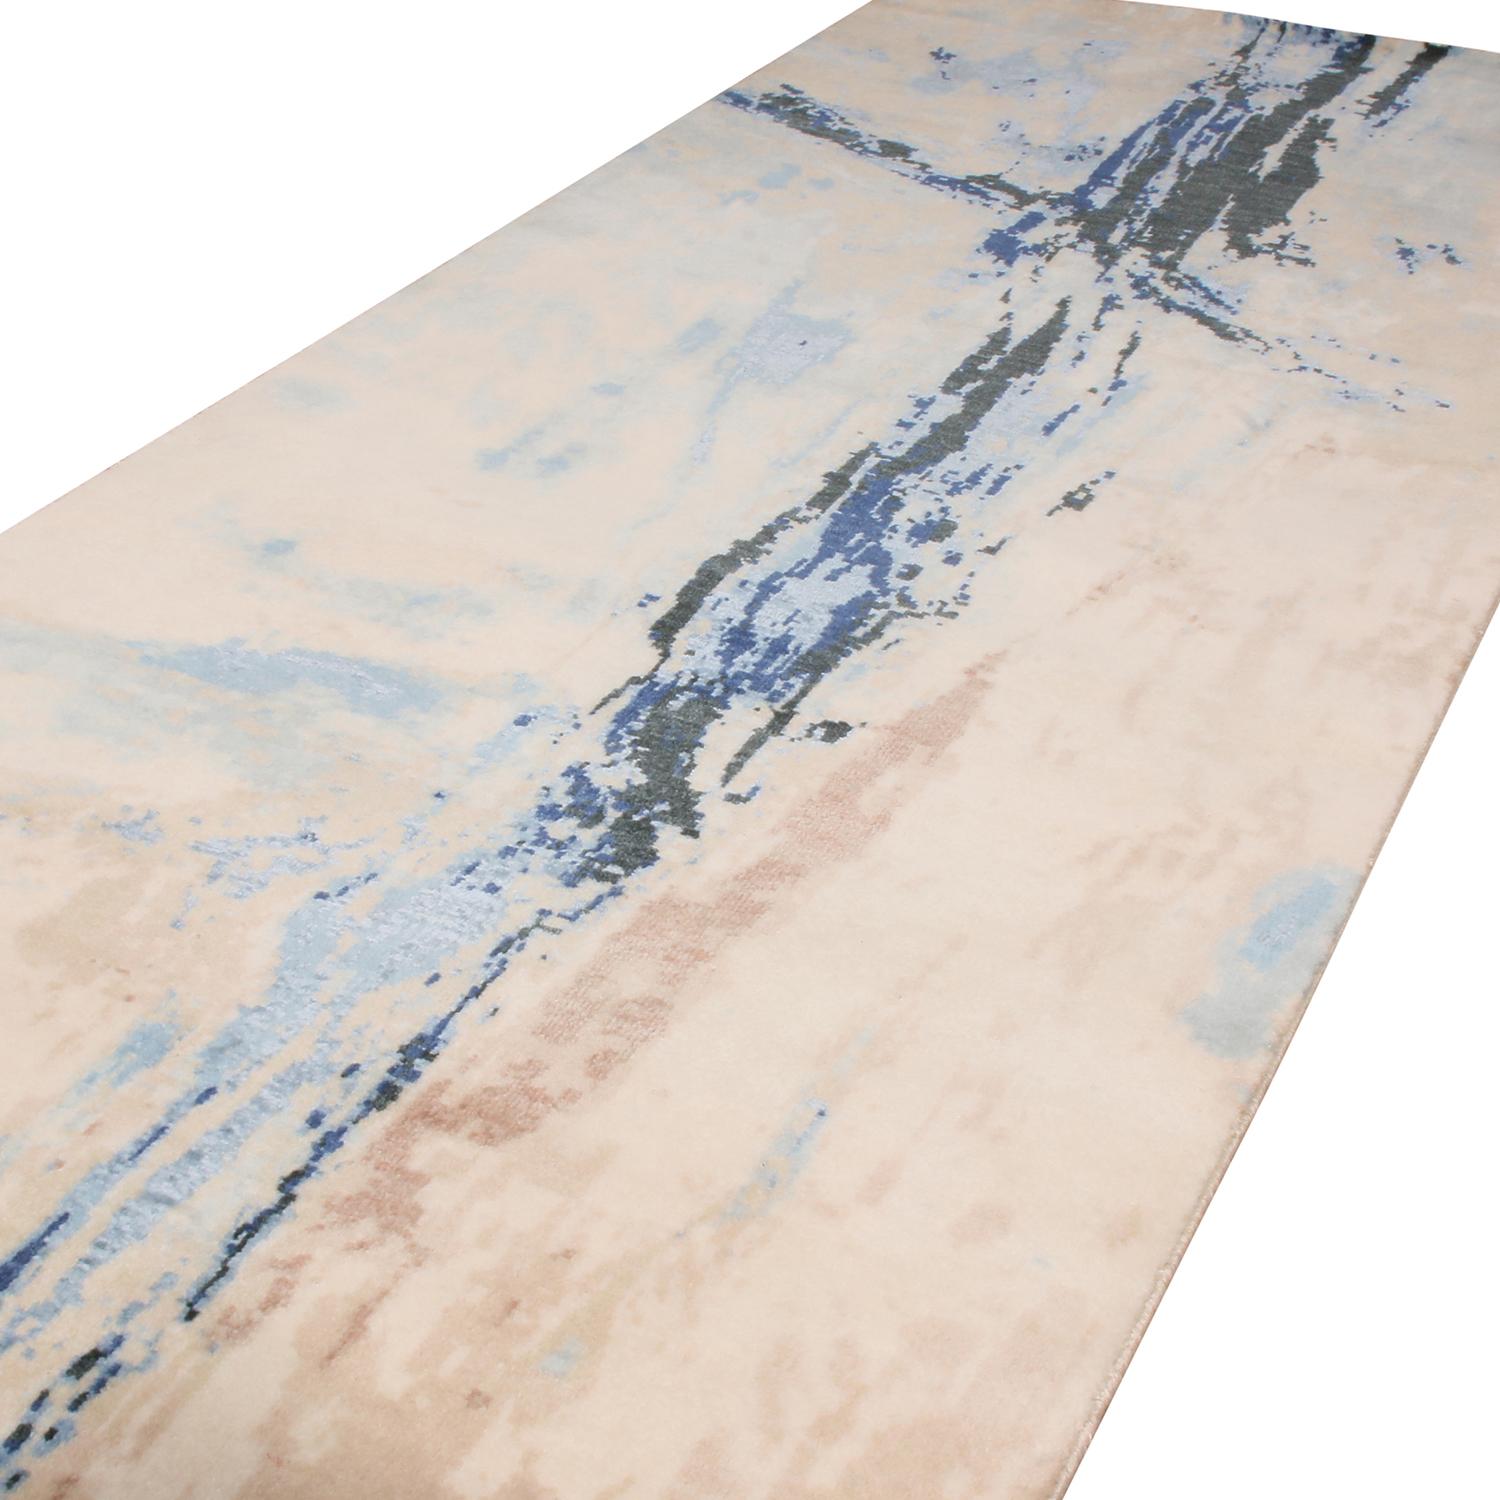 A new addition to the handmade rugs in the abstract rug line by Rug & Kilim, this 2'9'' X 6'8'' modern runner is hand knotted in a unique, proprietary blend of quality wool and silk, the natural luster of the latter bringing out transitional hues of